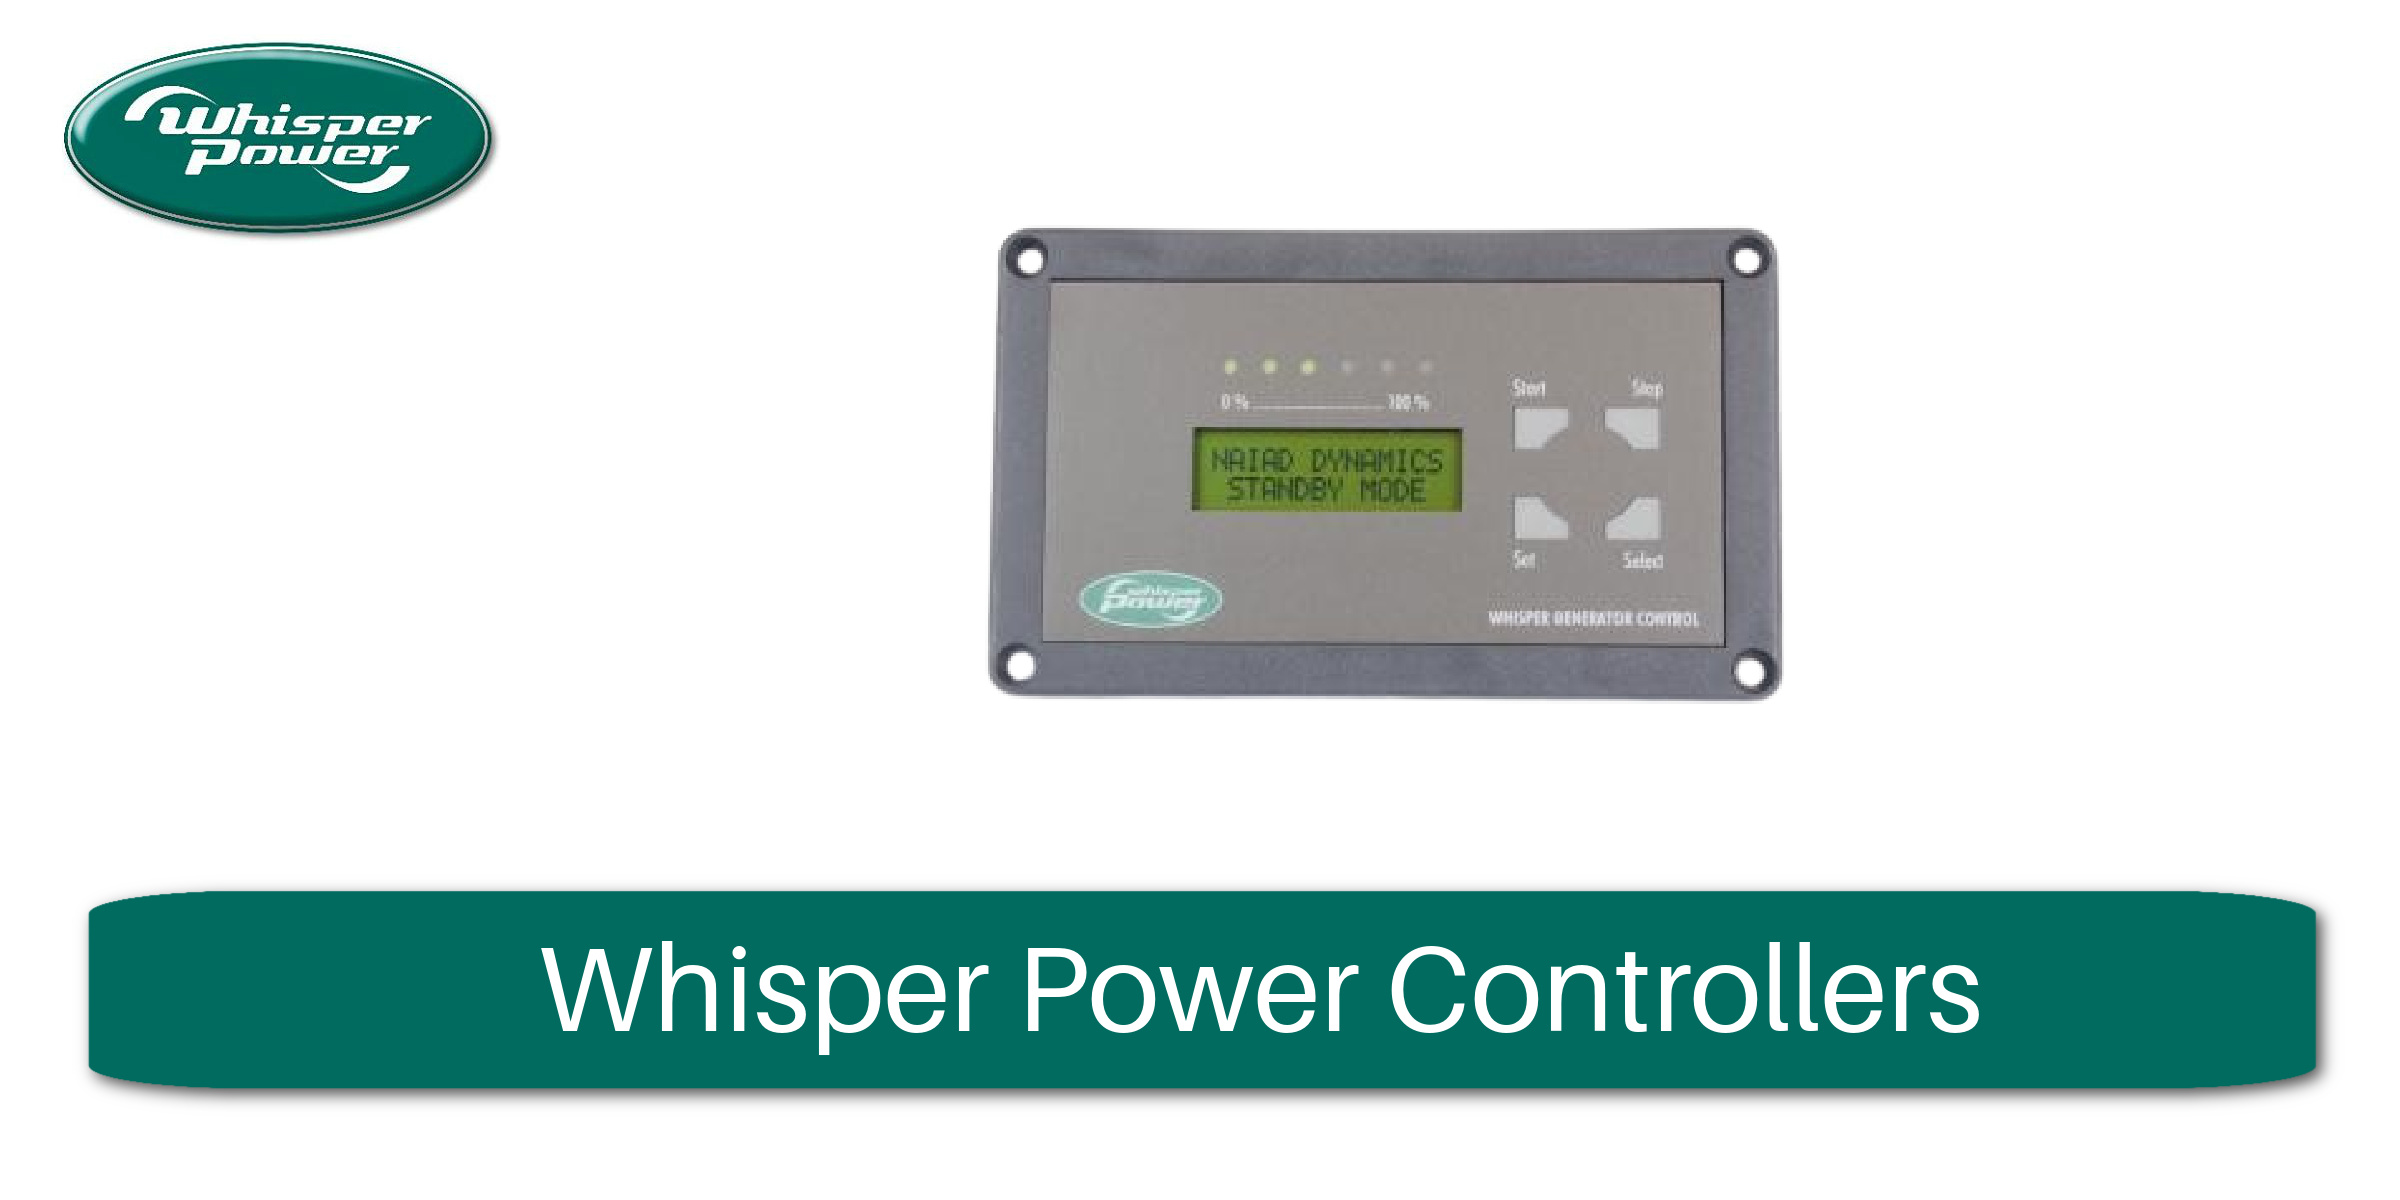 Whisper Power Controllers